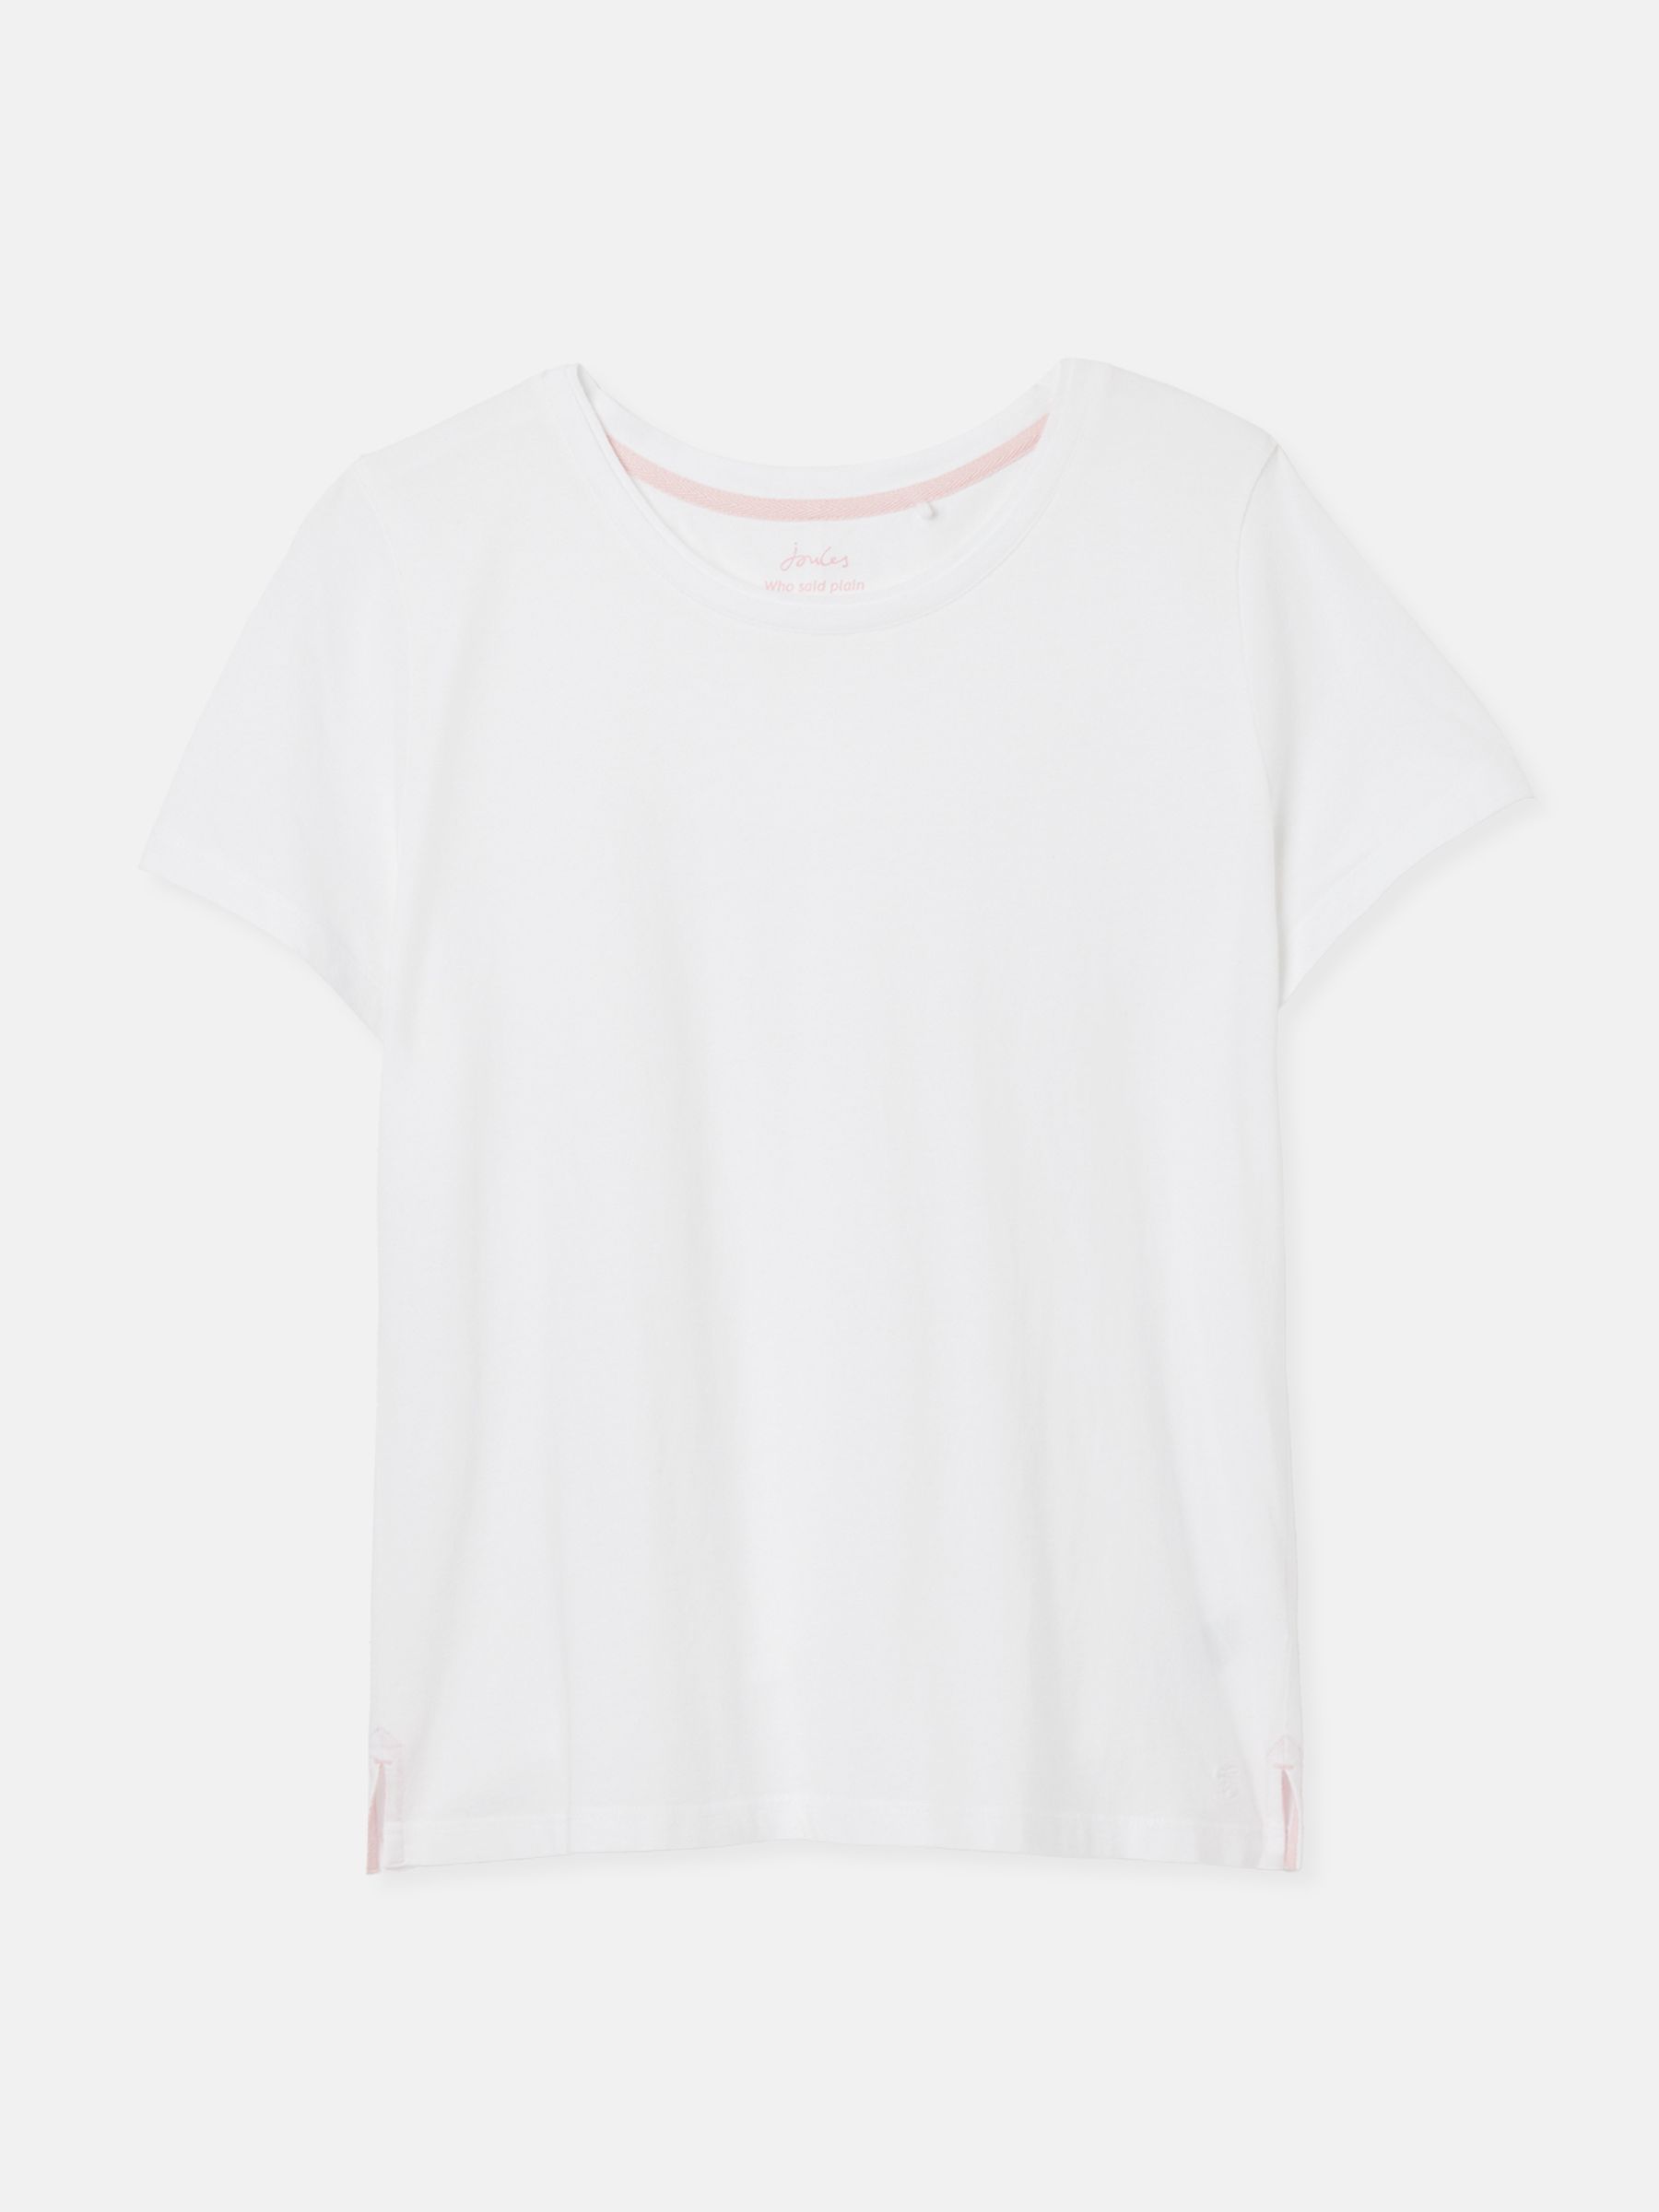 Buy Frankie White Crew T-Shirt from the Joules online shop